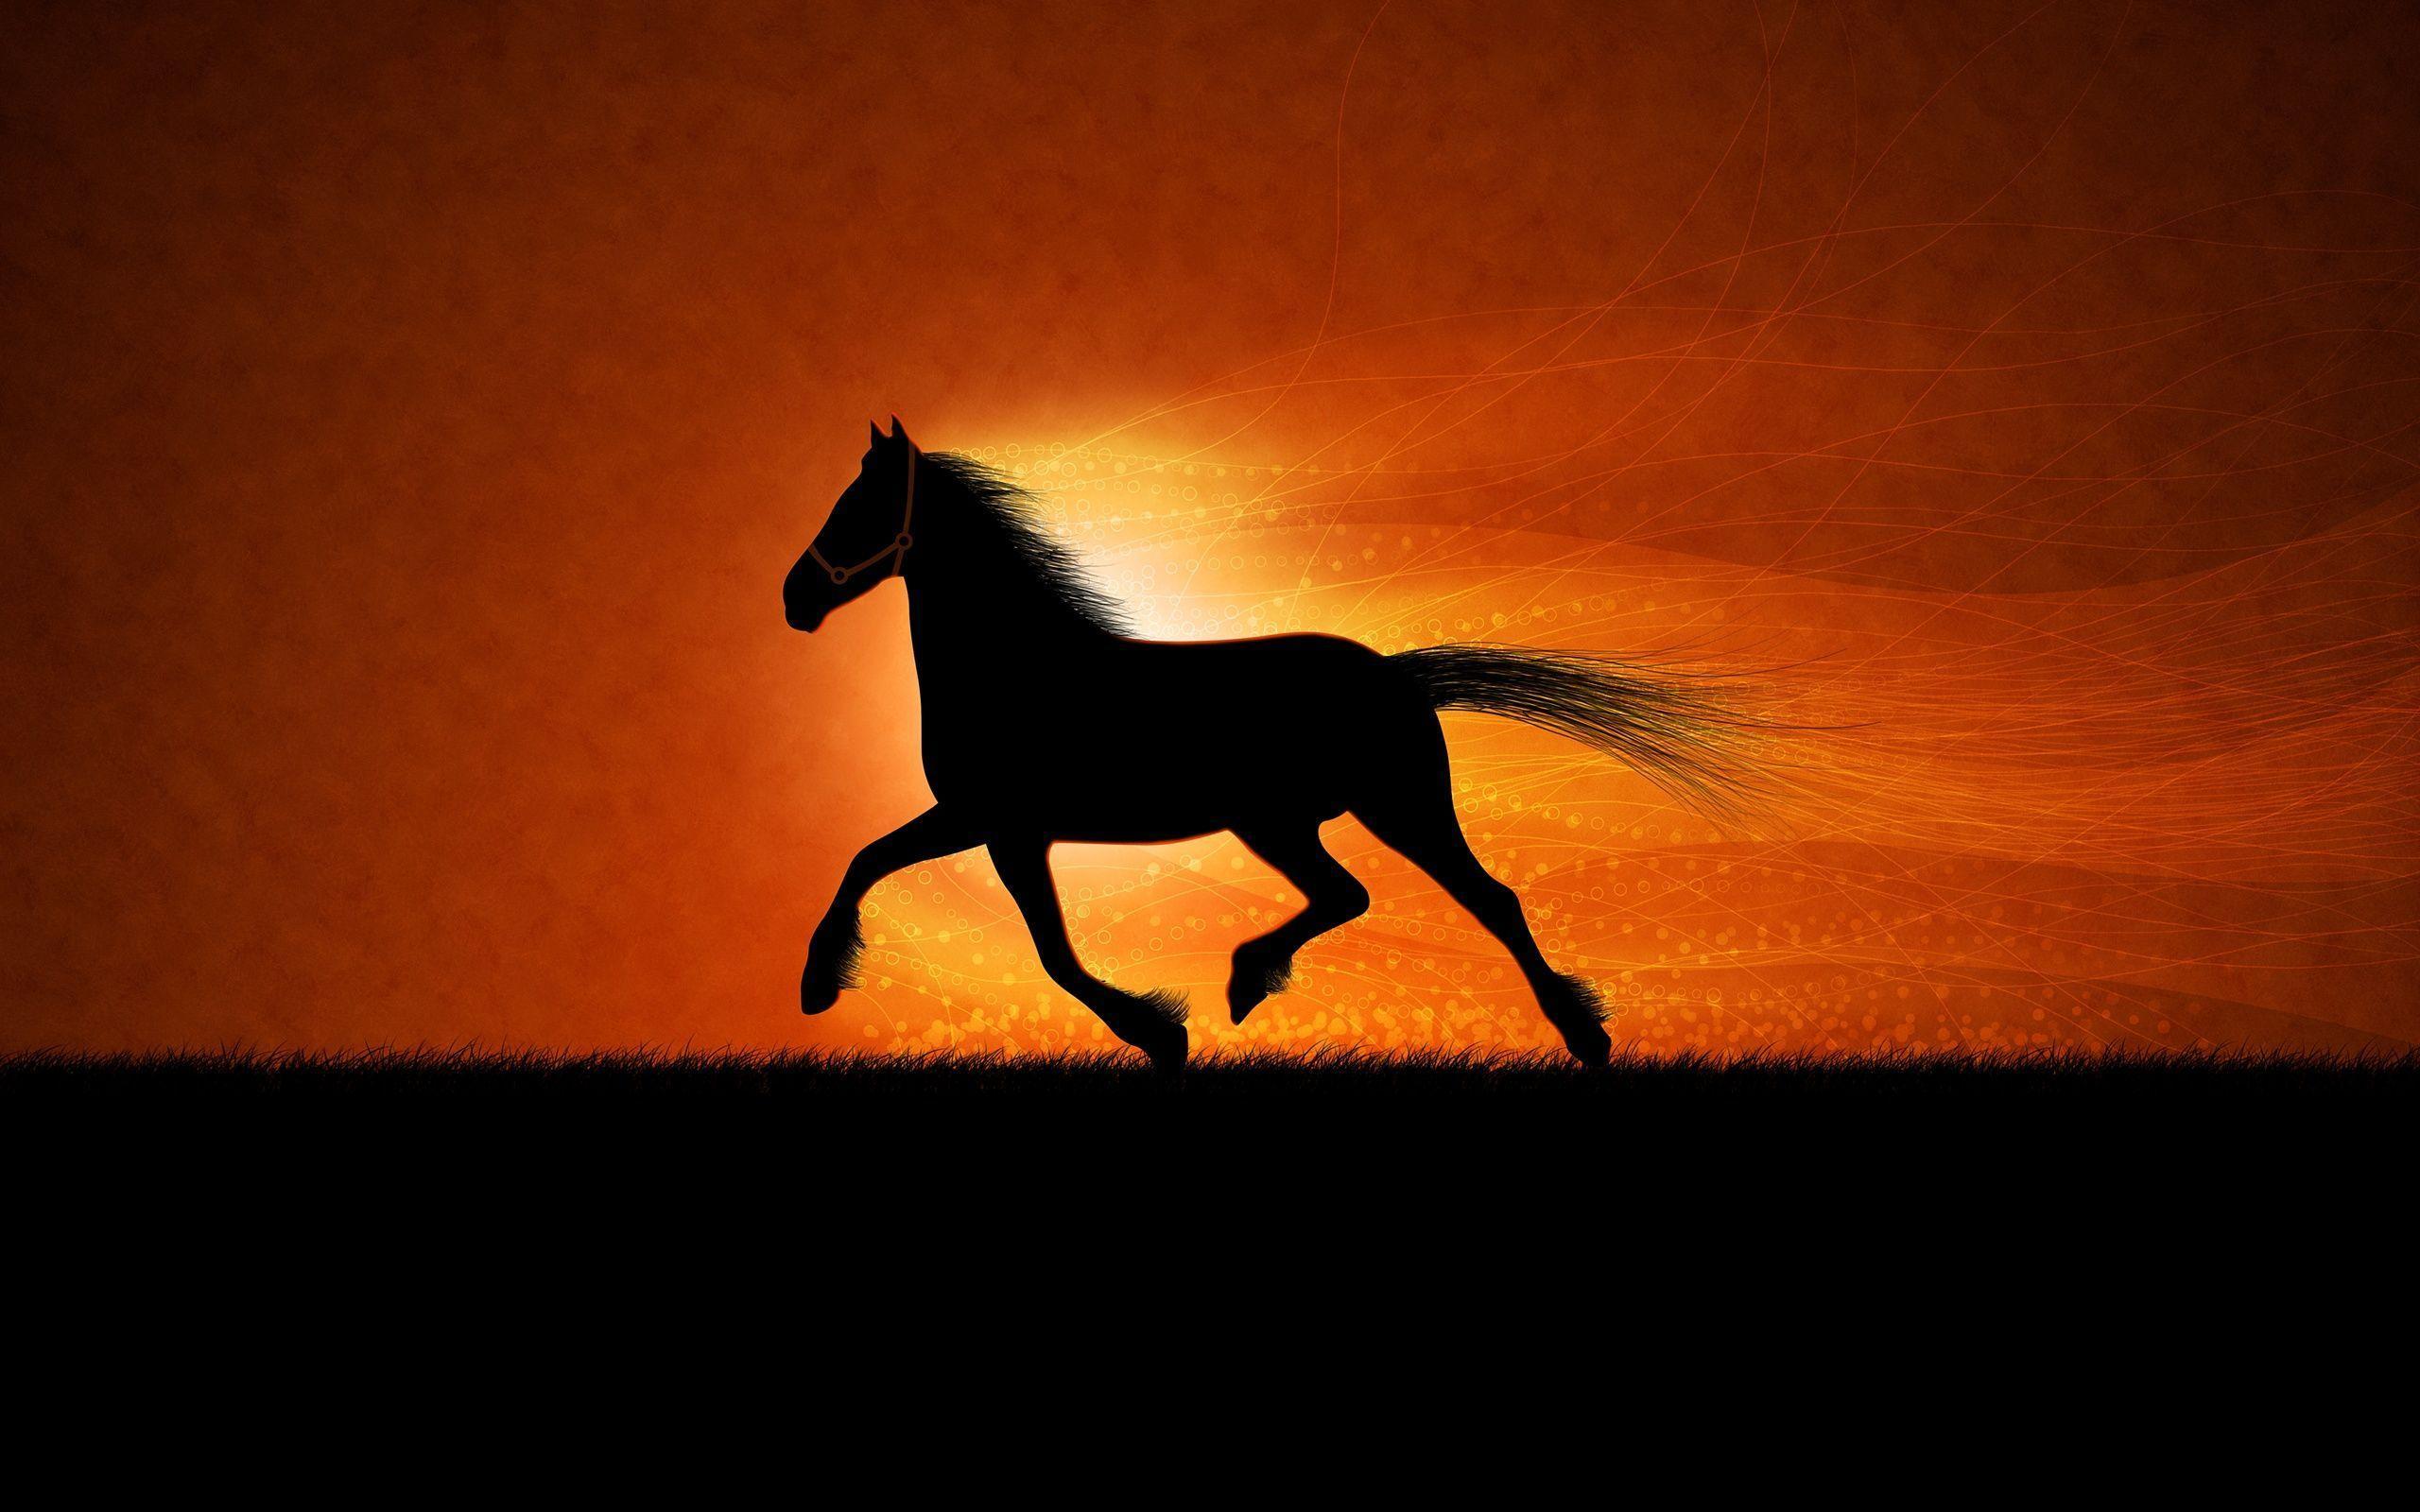 image For > Cool Horse Wallpaper